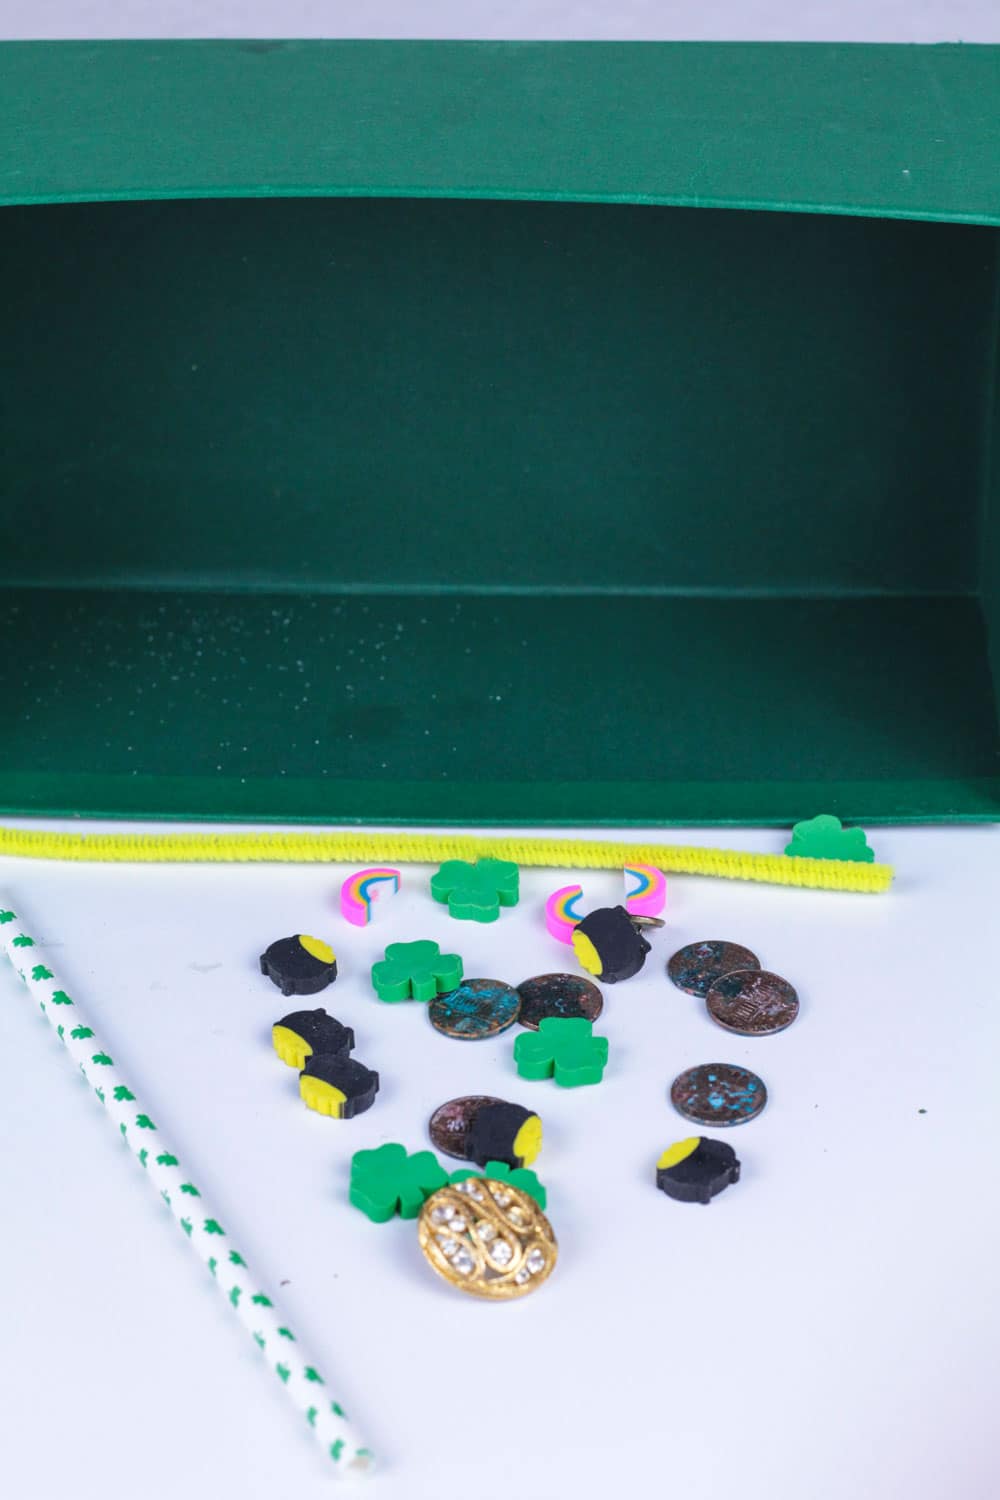 Build STEM skills in a fun way! The leprechaun trap STEM activity is a fun STEM activity for St. Patrick's Day that kids of all ages will love. Try the leprechaun trap challenge in your classroom or at home!